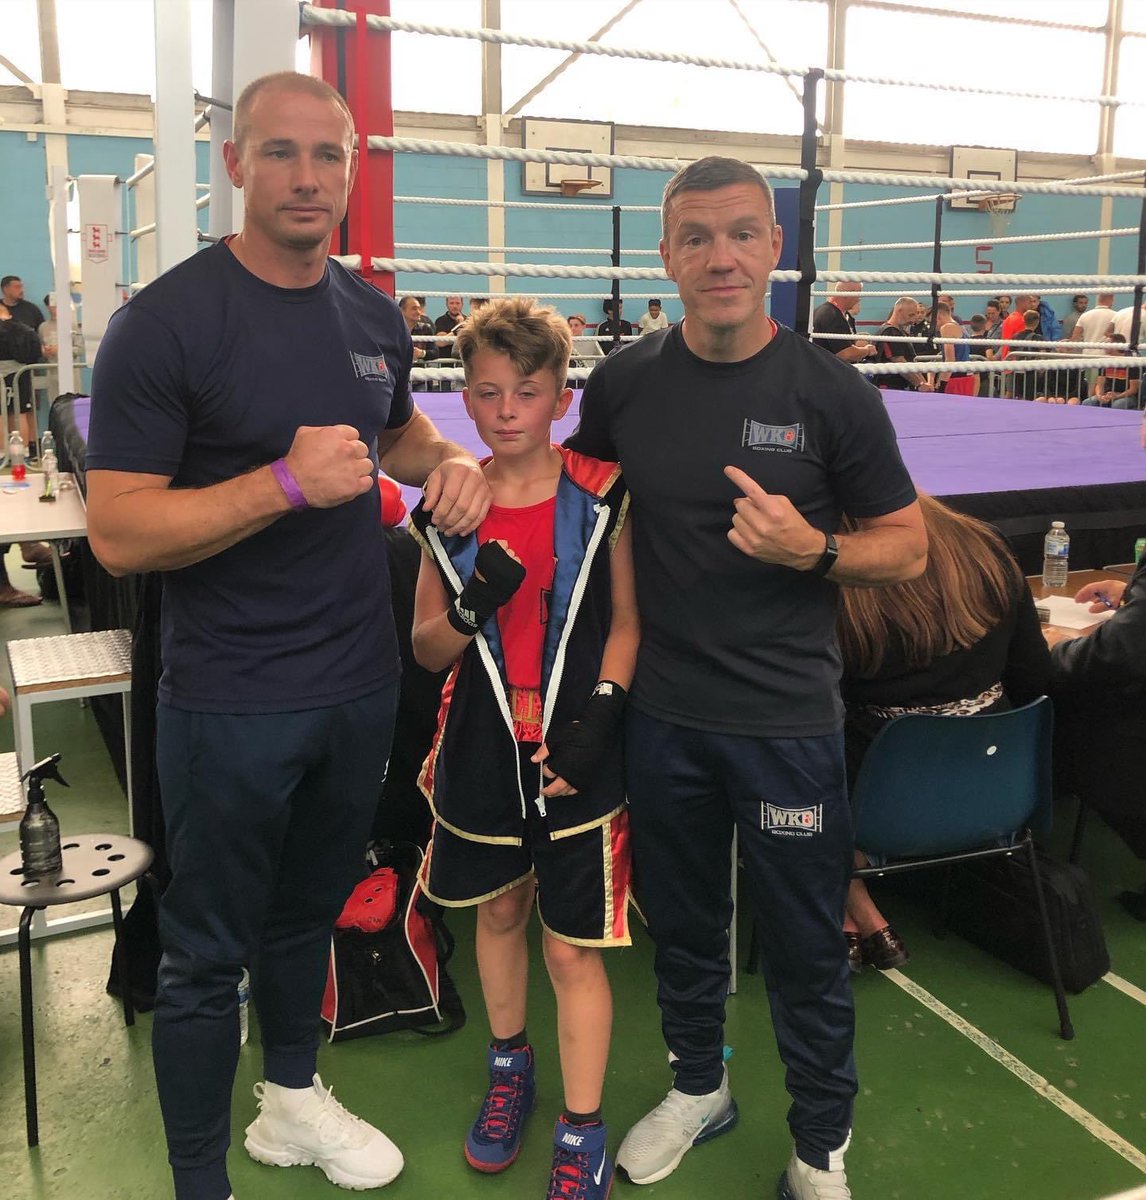 This one’s for you Perin!Billy boxes lovely on the Boxing Stables show against a very good boy from Cricklewood,a strong finish makes sure of a unanimous win&is dedicated to his uncle Perin who is at home recovering from covid!#winner #teamwkd @7oaksSports @England_Boxing